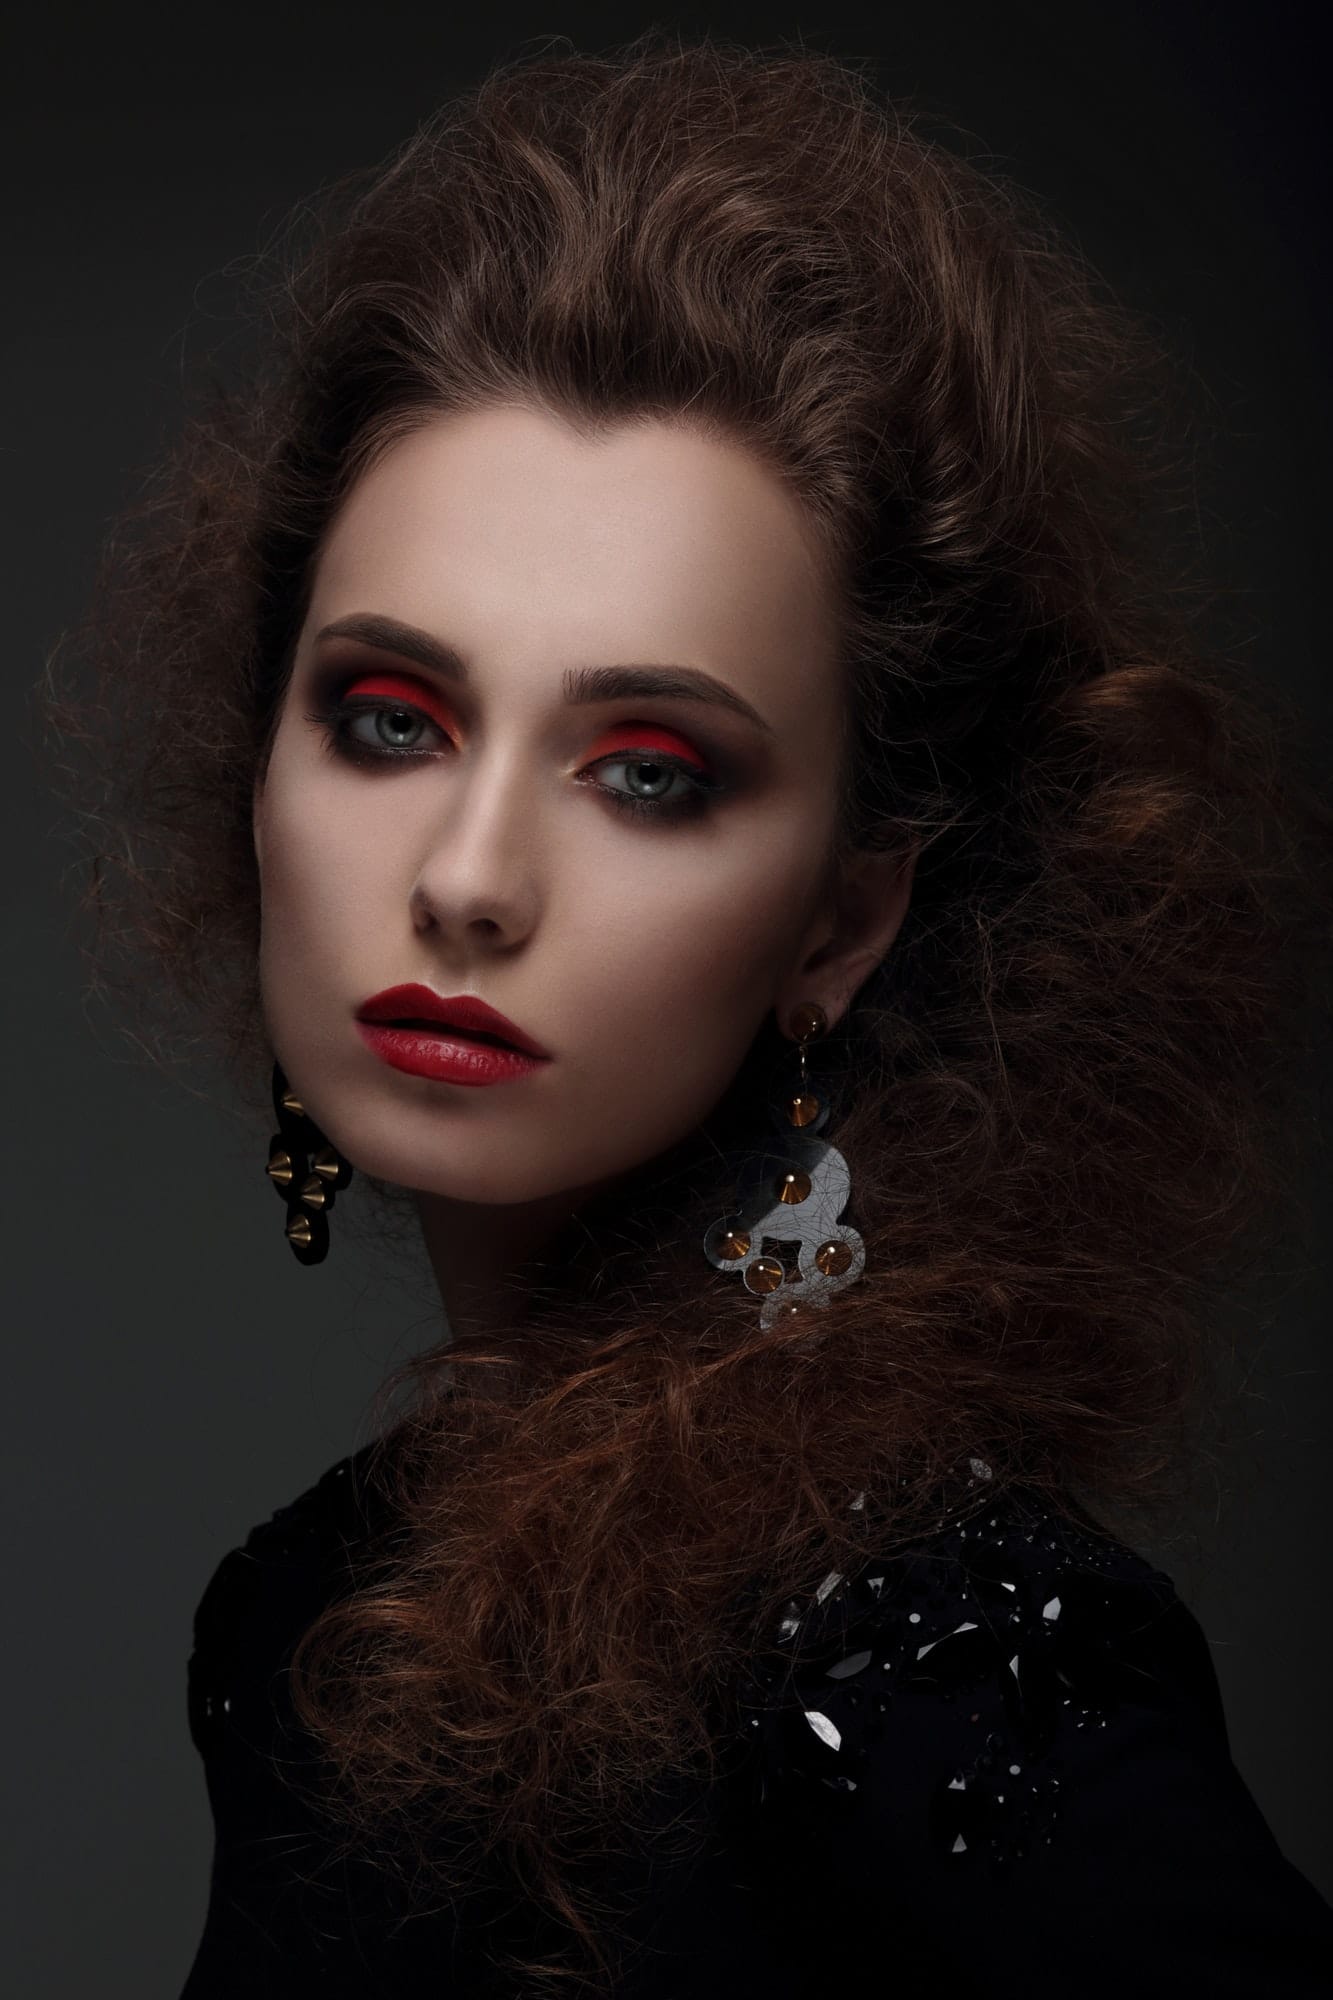 Portrait of a woman with high hair and red lips.